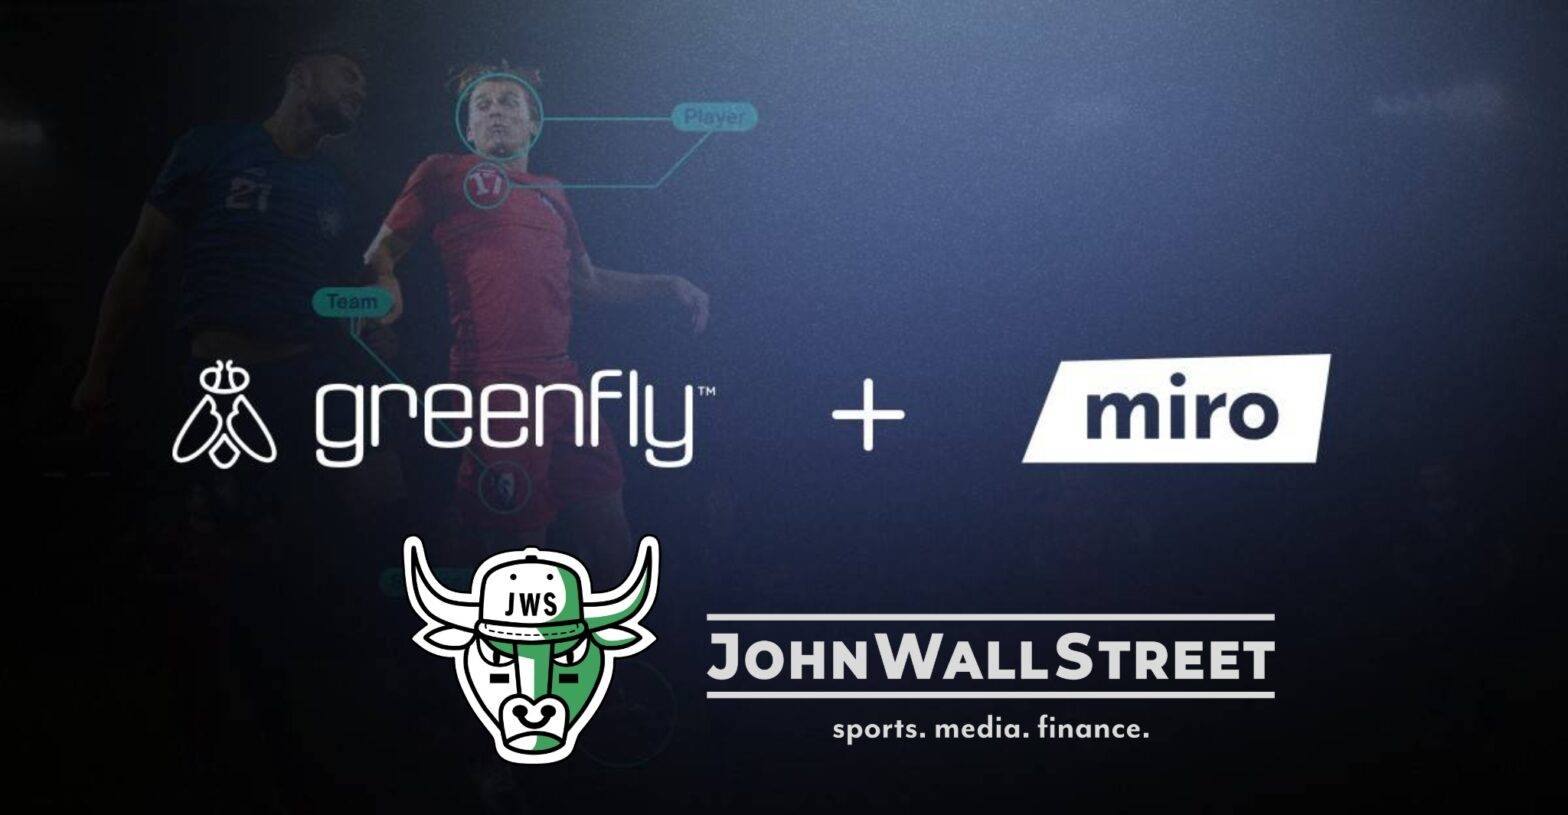 JohnWallStreet: Greenfly’s Miro AI Acquisition Reflects Growing Value of Short-Form Content